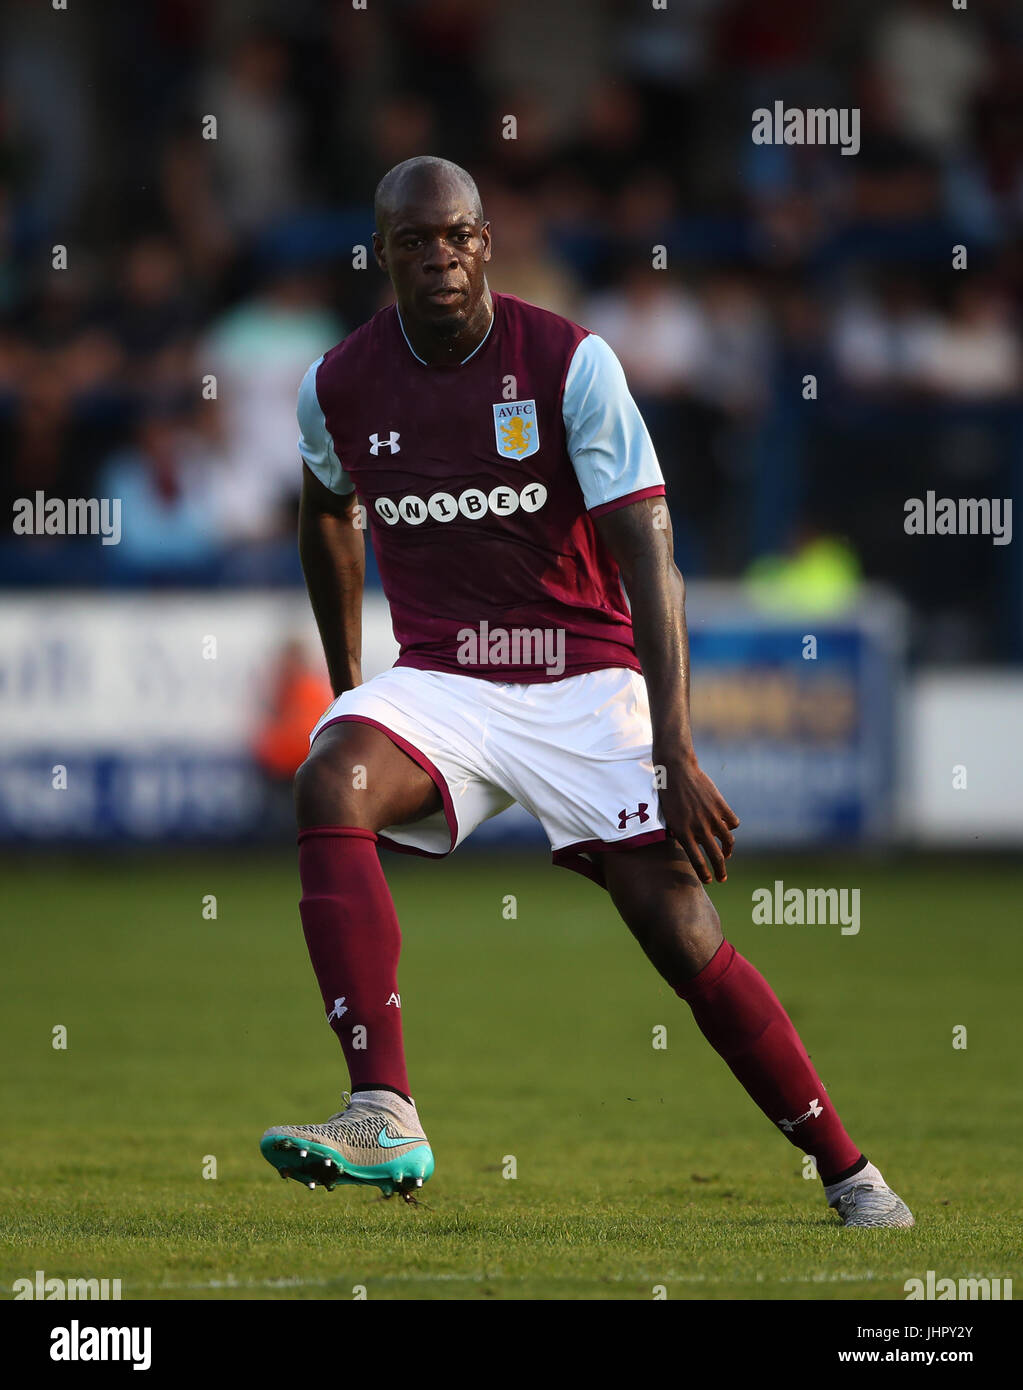 Aston Villa's Chris Samba during the pre-season friendly at New Bucks Head, Telford. PRESS ASSOCIATION Photo. Picture date: Wednesday July 12, 2017. Photo credit should read: Nick Potts/PA Wire. RESTRICTIONS: No use with unauthorised audio, video, data, fixture lists, club/league logos or 'live' services. Online in-match use limited to 75 images, no video emulation. No use in betting, games or single club/league/player publications. Stock Photo